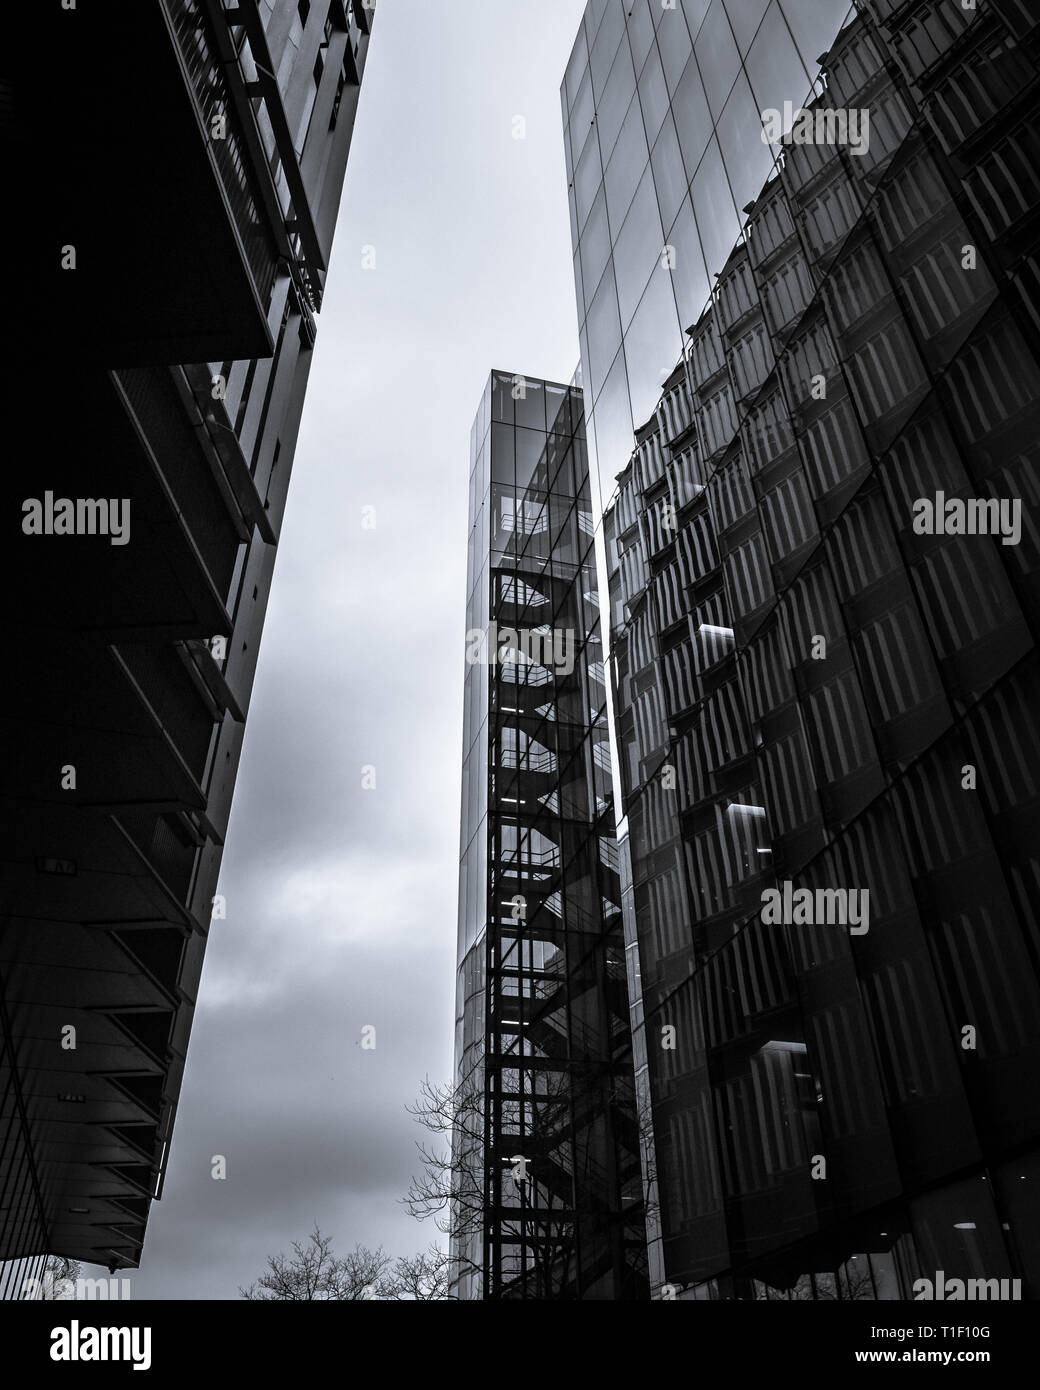 London, United Kingdom: Tall glass buildings in London's Southwark district. Black and white. Stock Photo